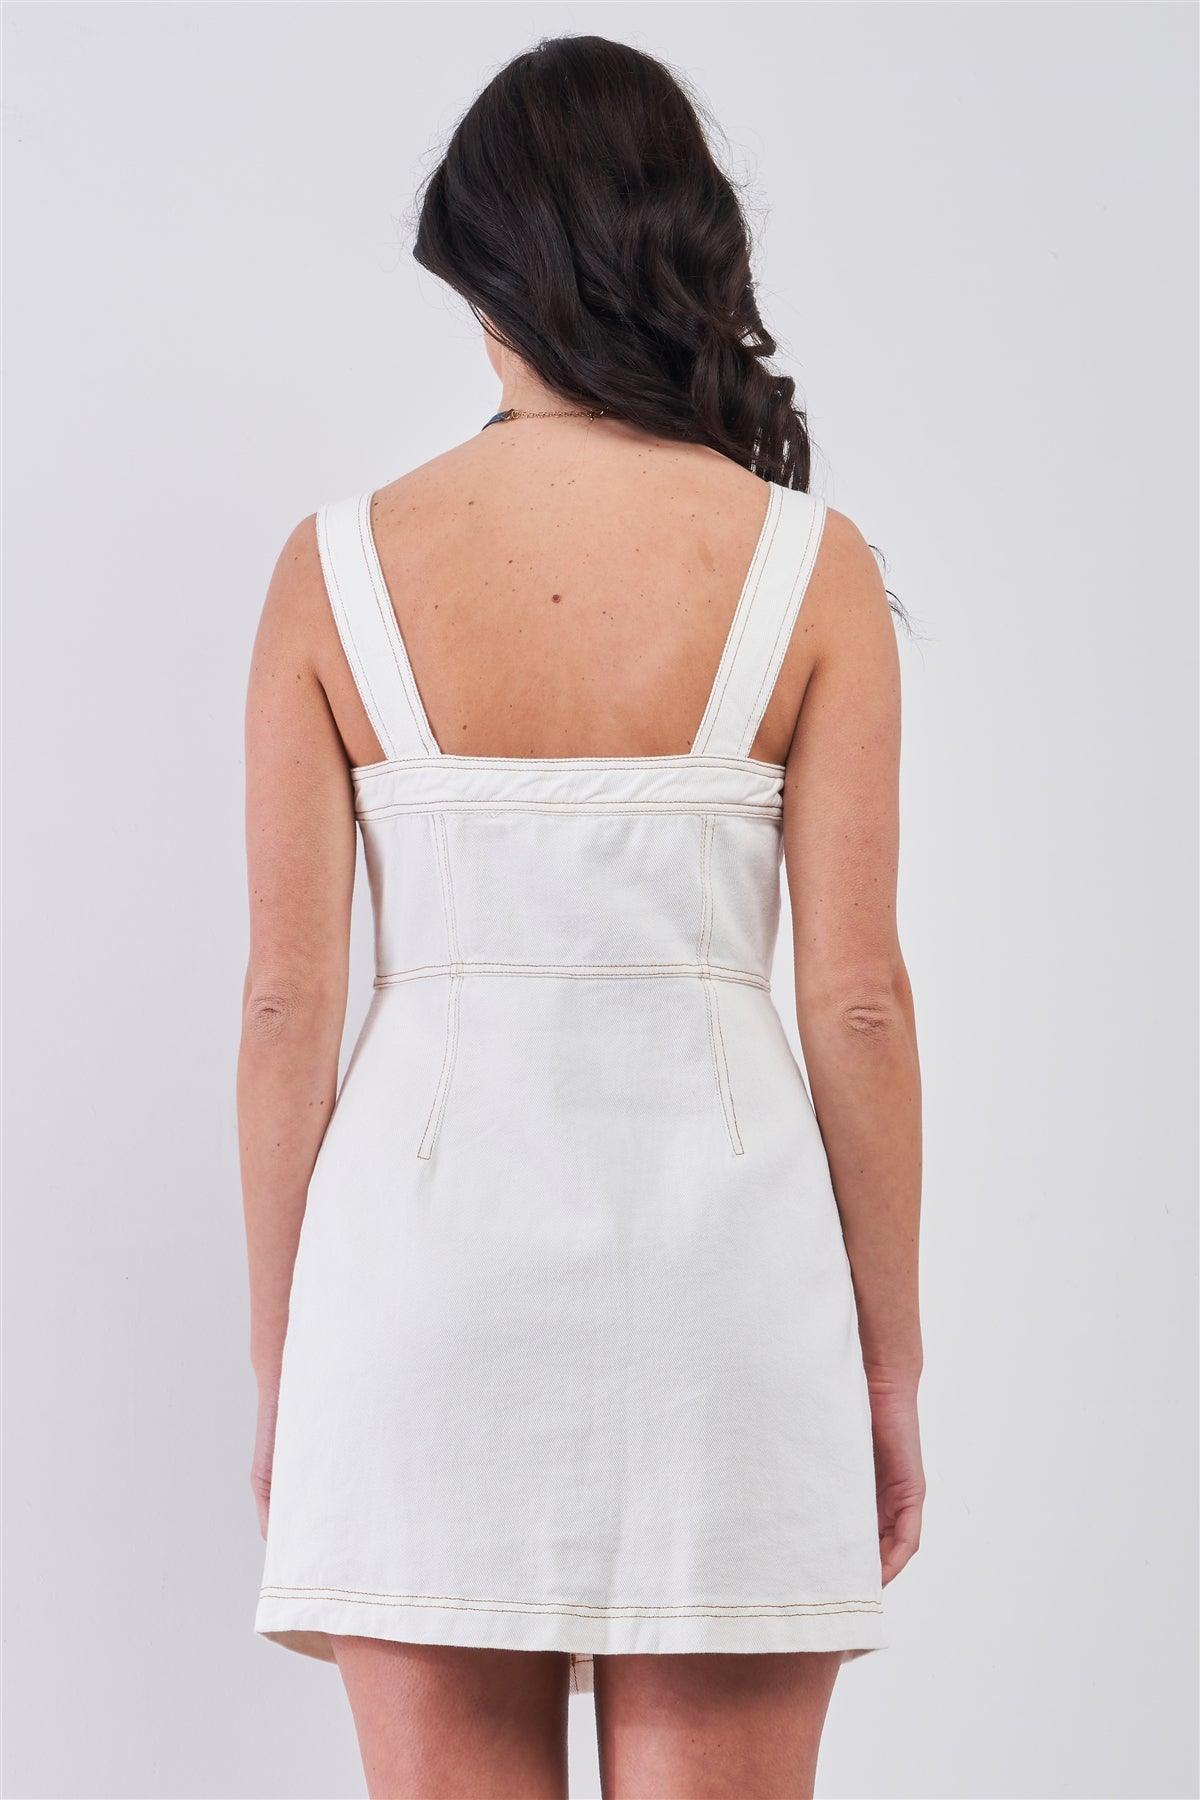 Off-White Denim Sleeveless Square Neck Front Button Down Two Front Pockets Fitted Mini Dress /3-2-1